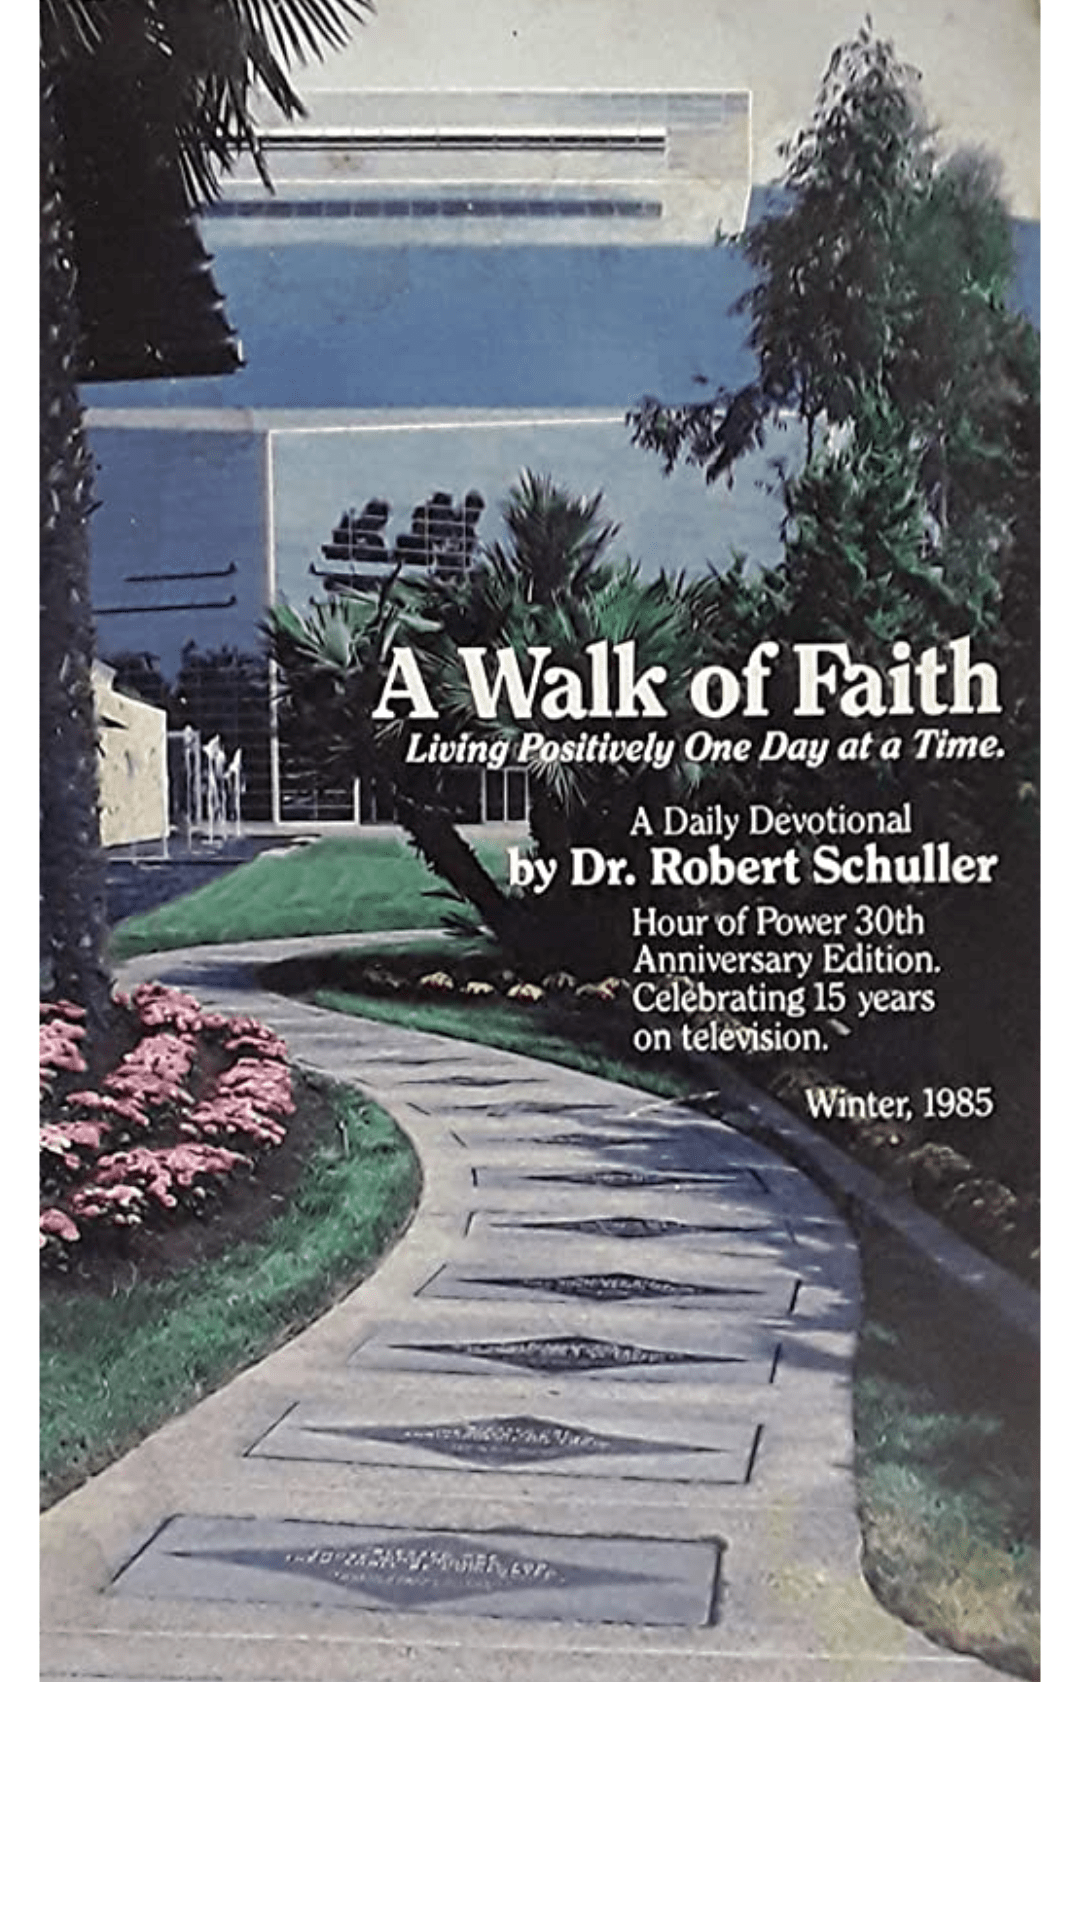 A walk of faith: living positively one day at a time: a daily devotional